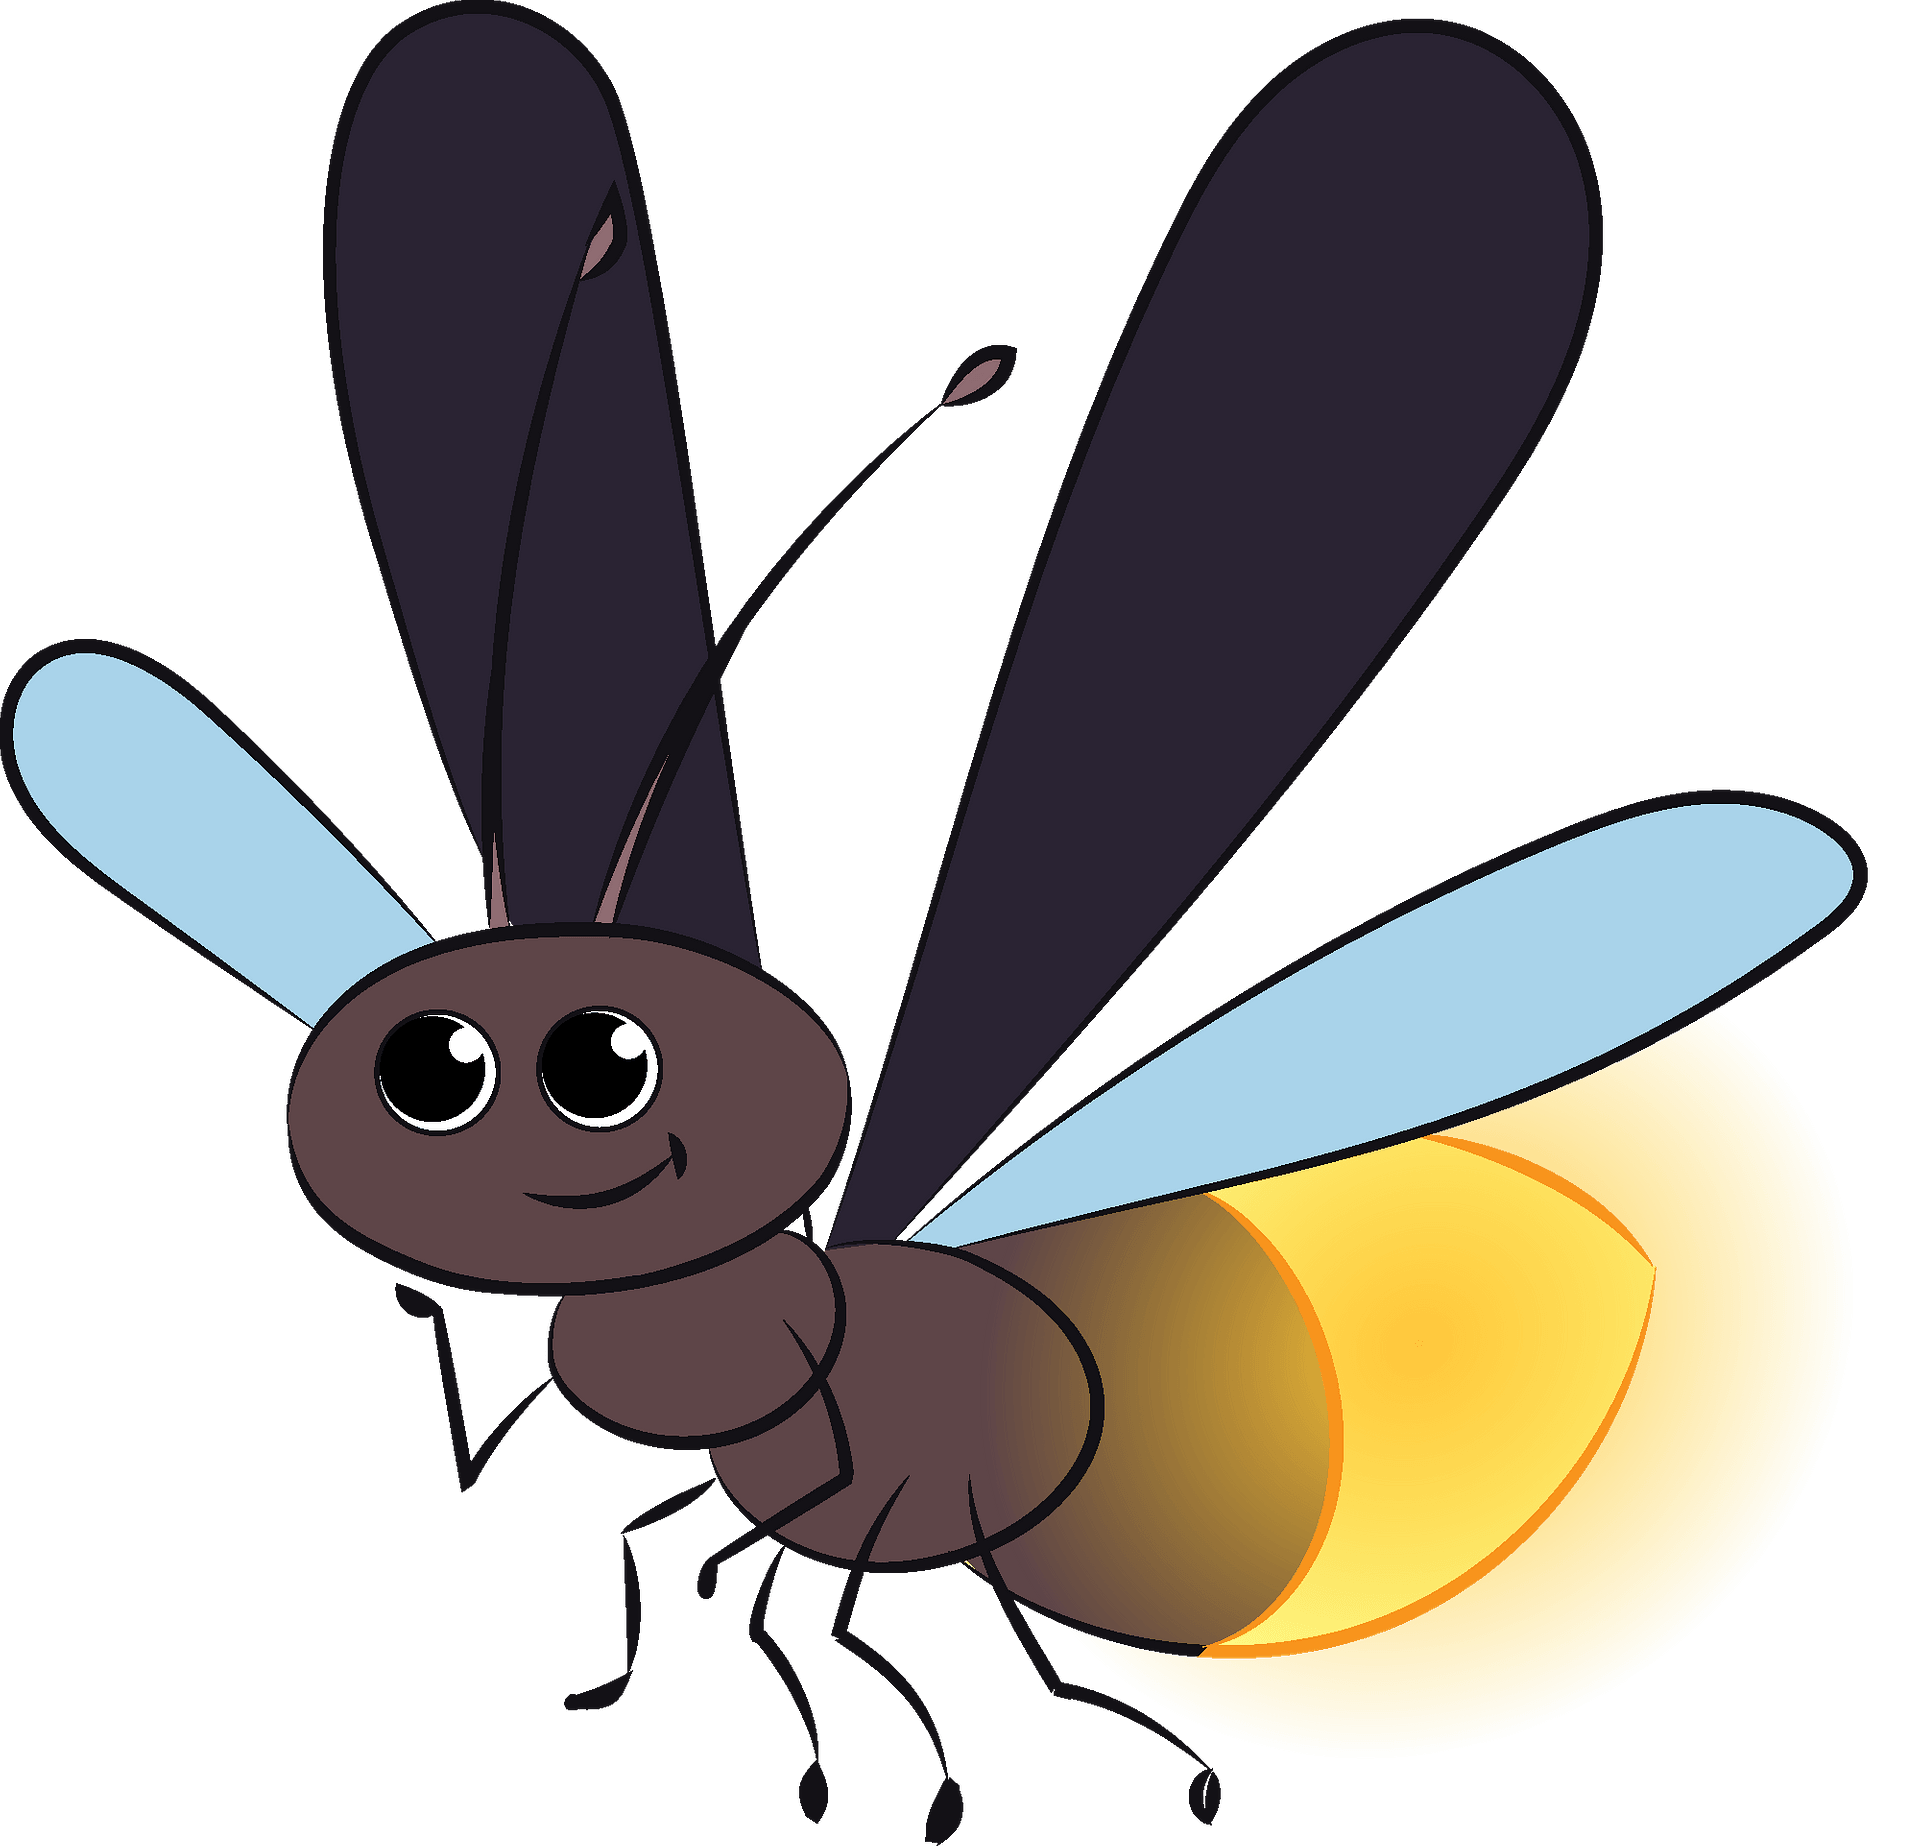 Free firefly clipart, Download Free firefly clipart png images, Free ...